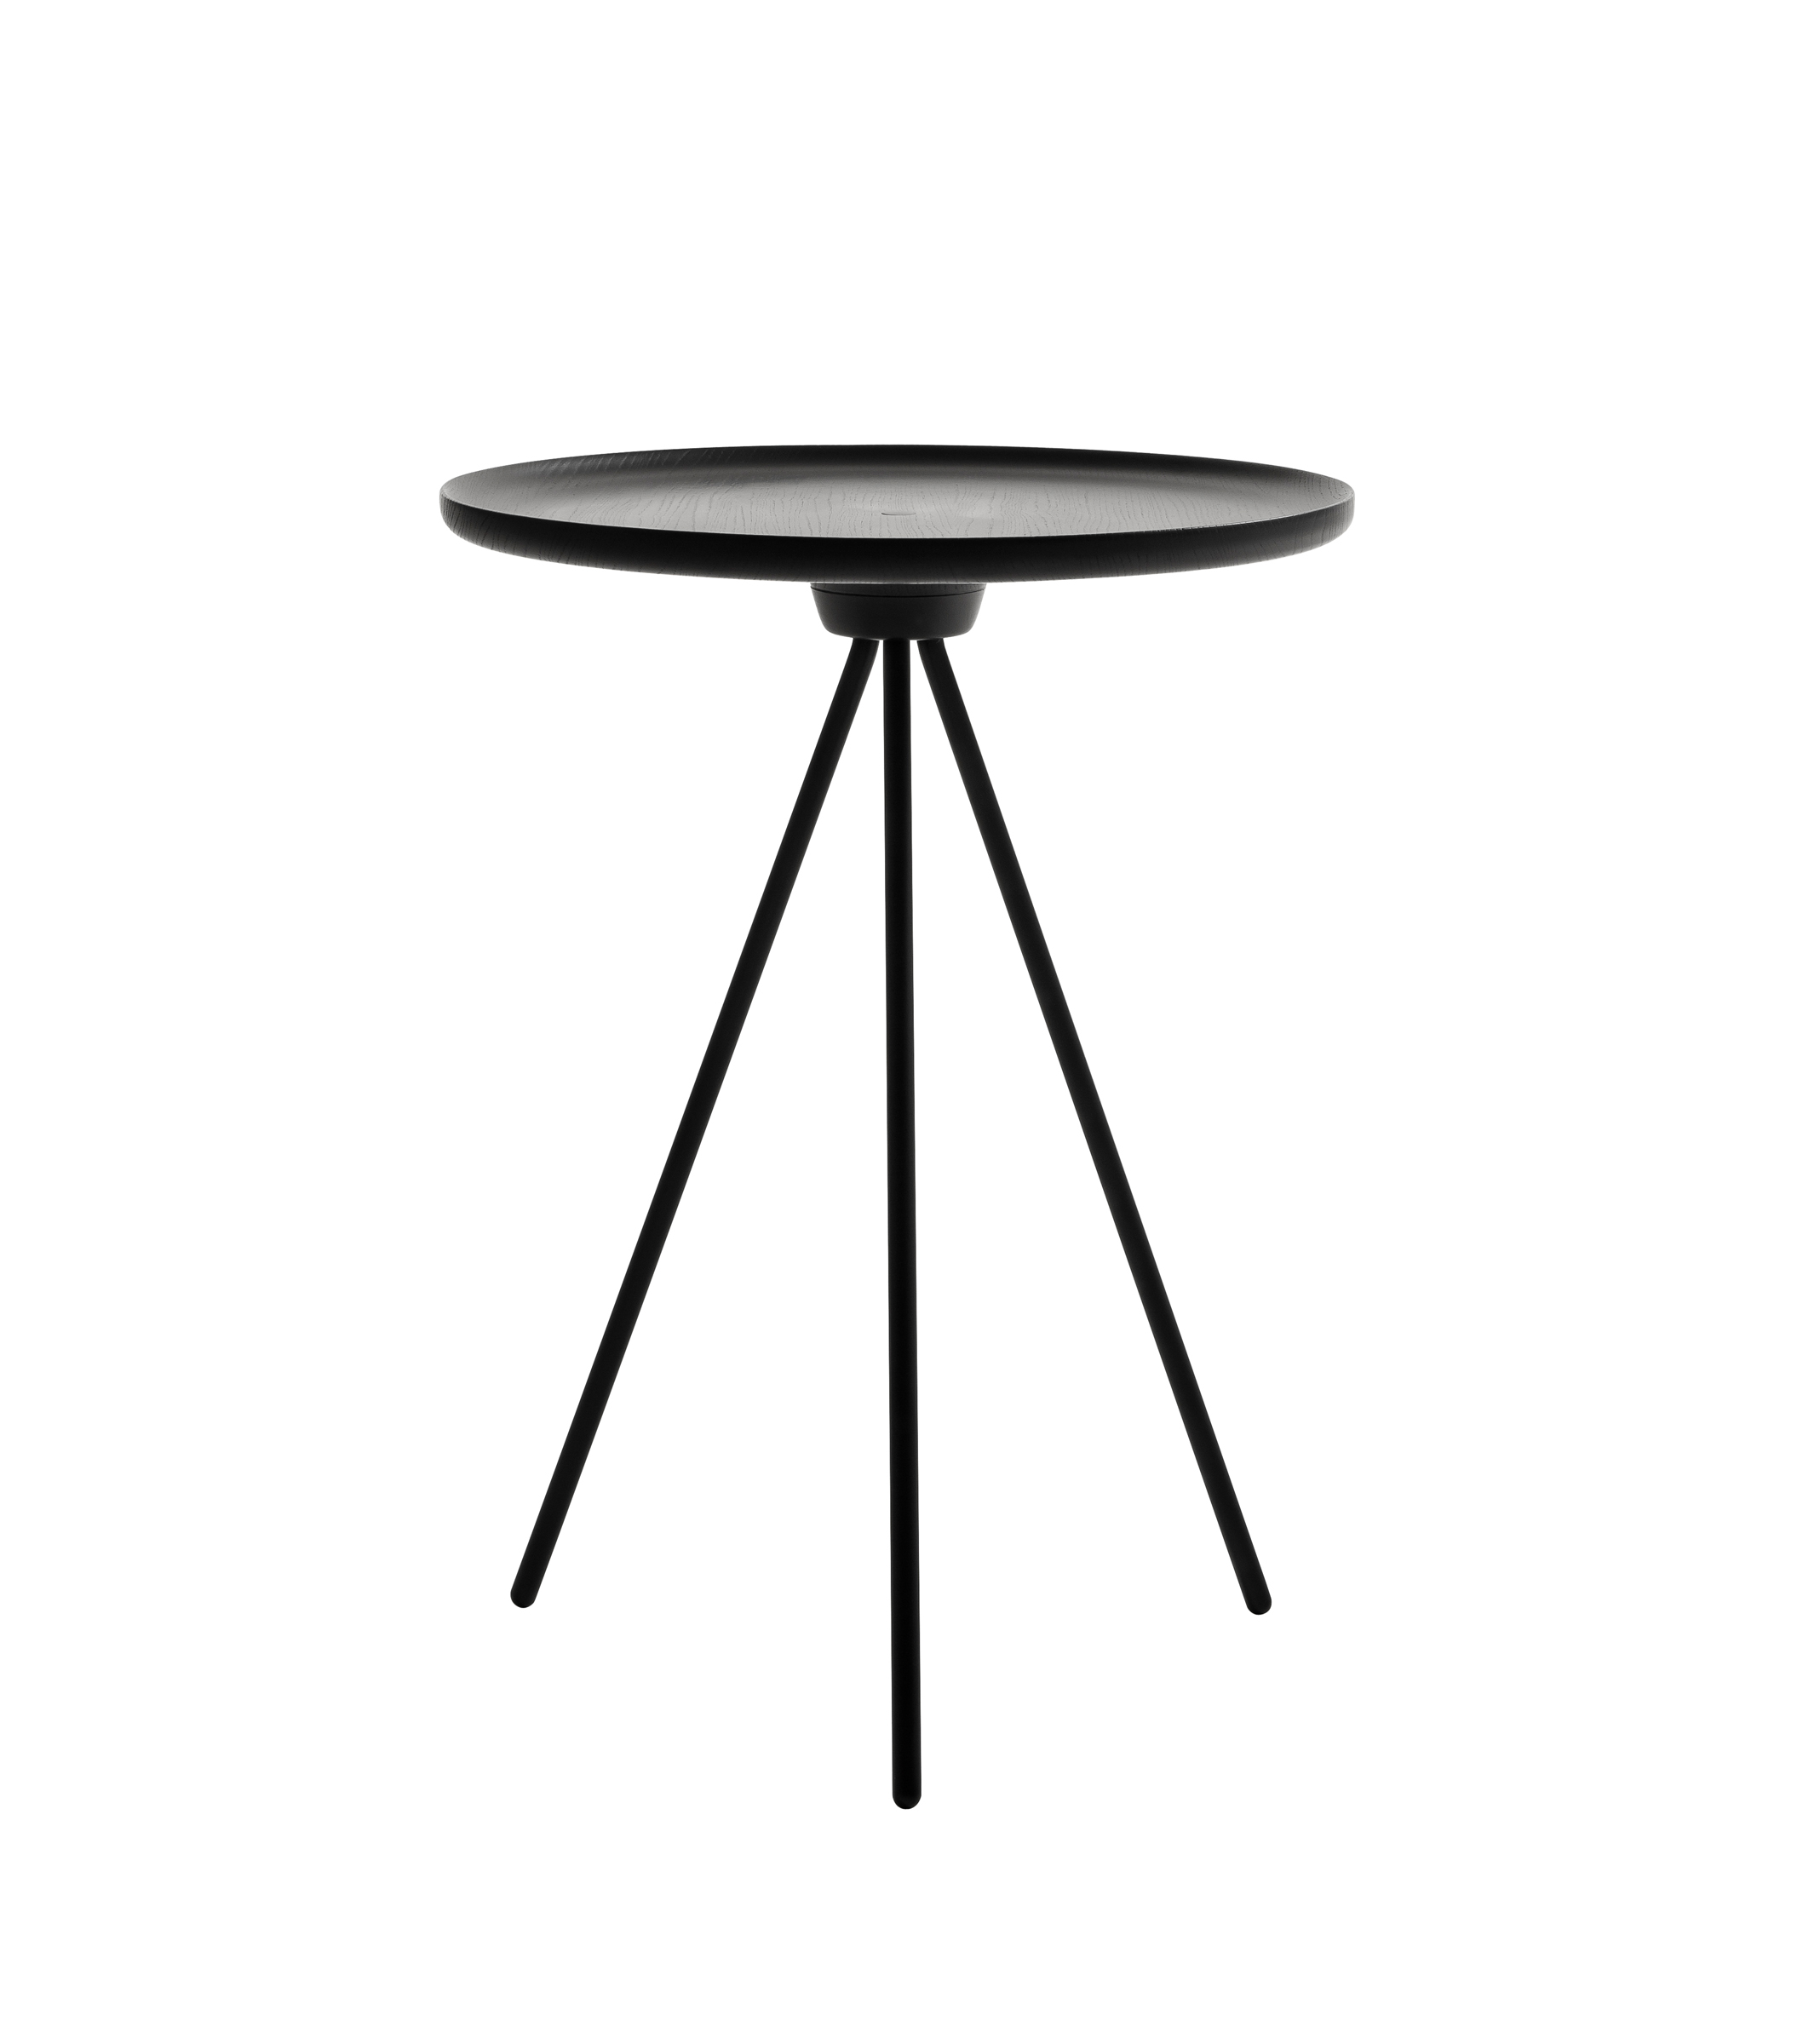 probably fantastic fun metal nightstand table ture hotxpress coffee round outdoor patio side black iron with three legs for bedroom furniture ideas mirrored night tables narrow